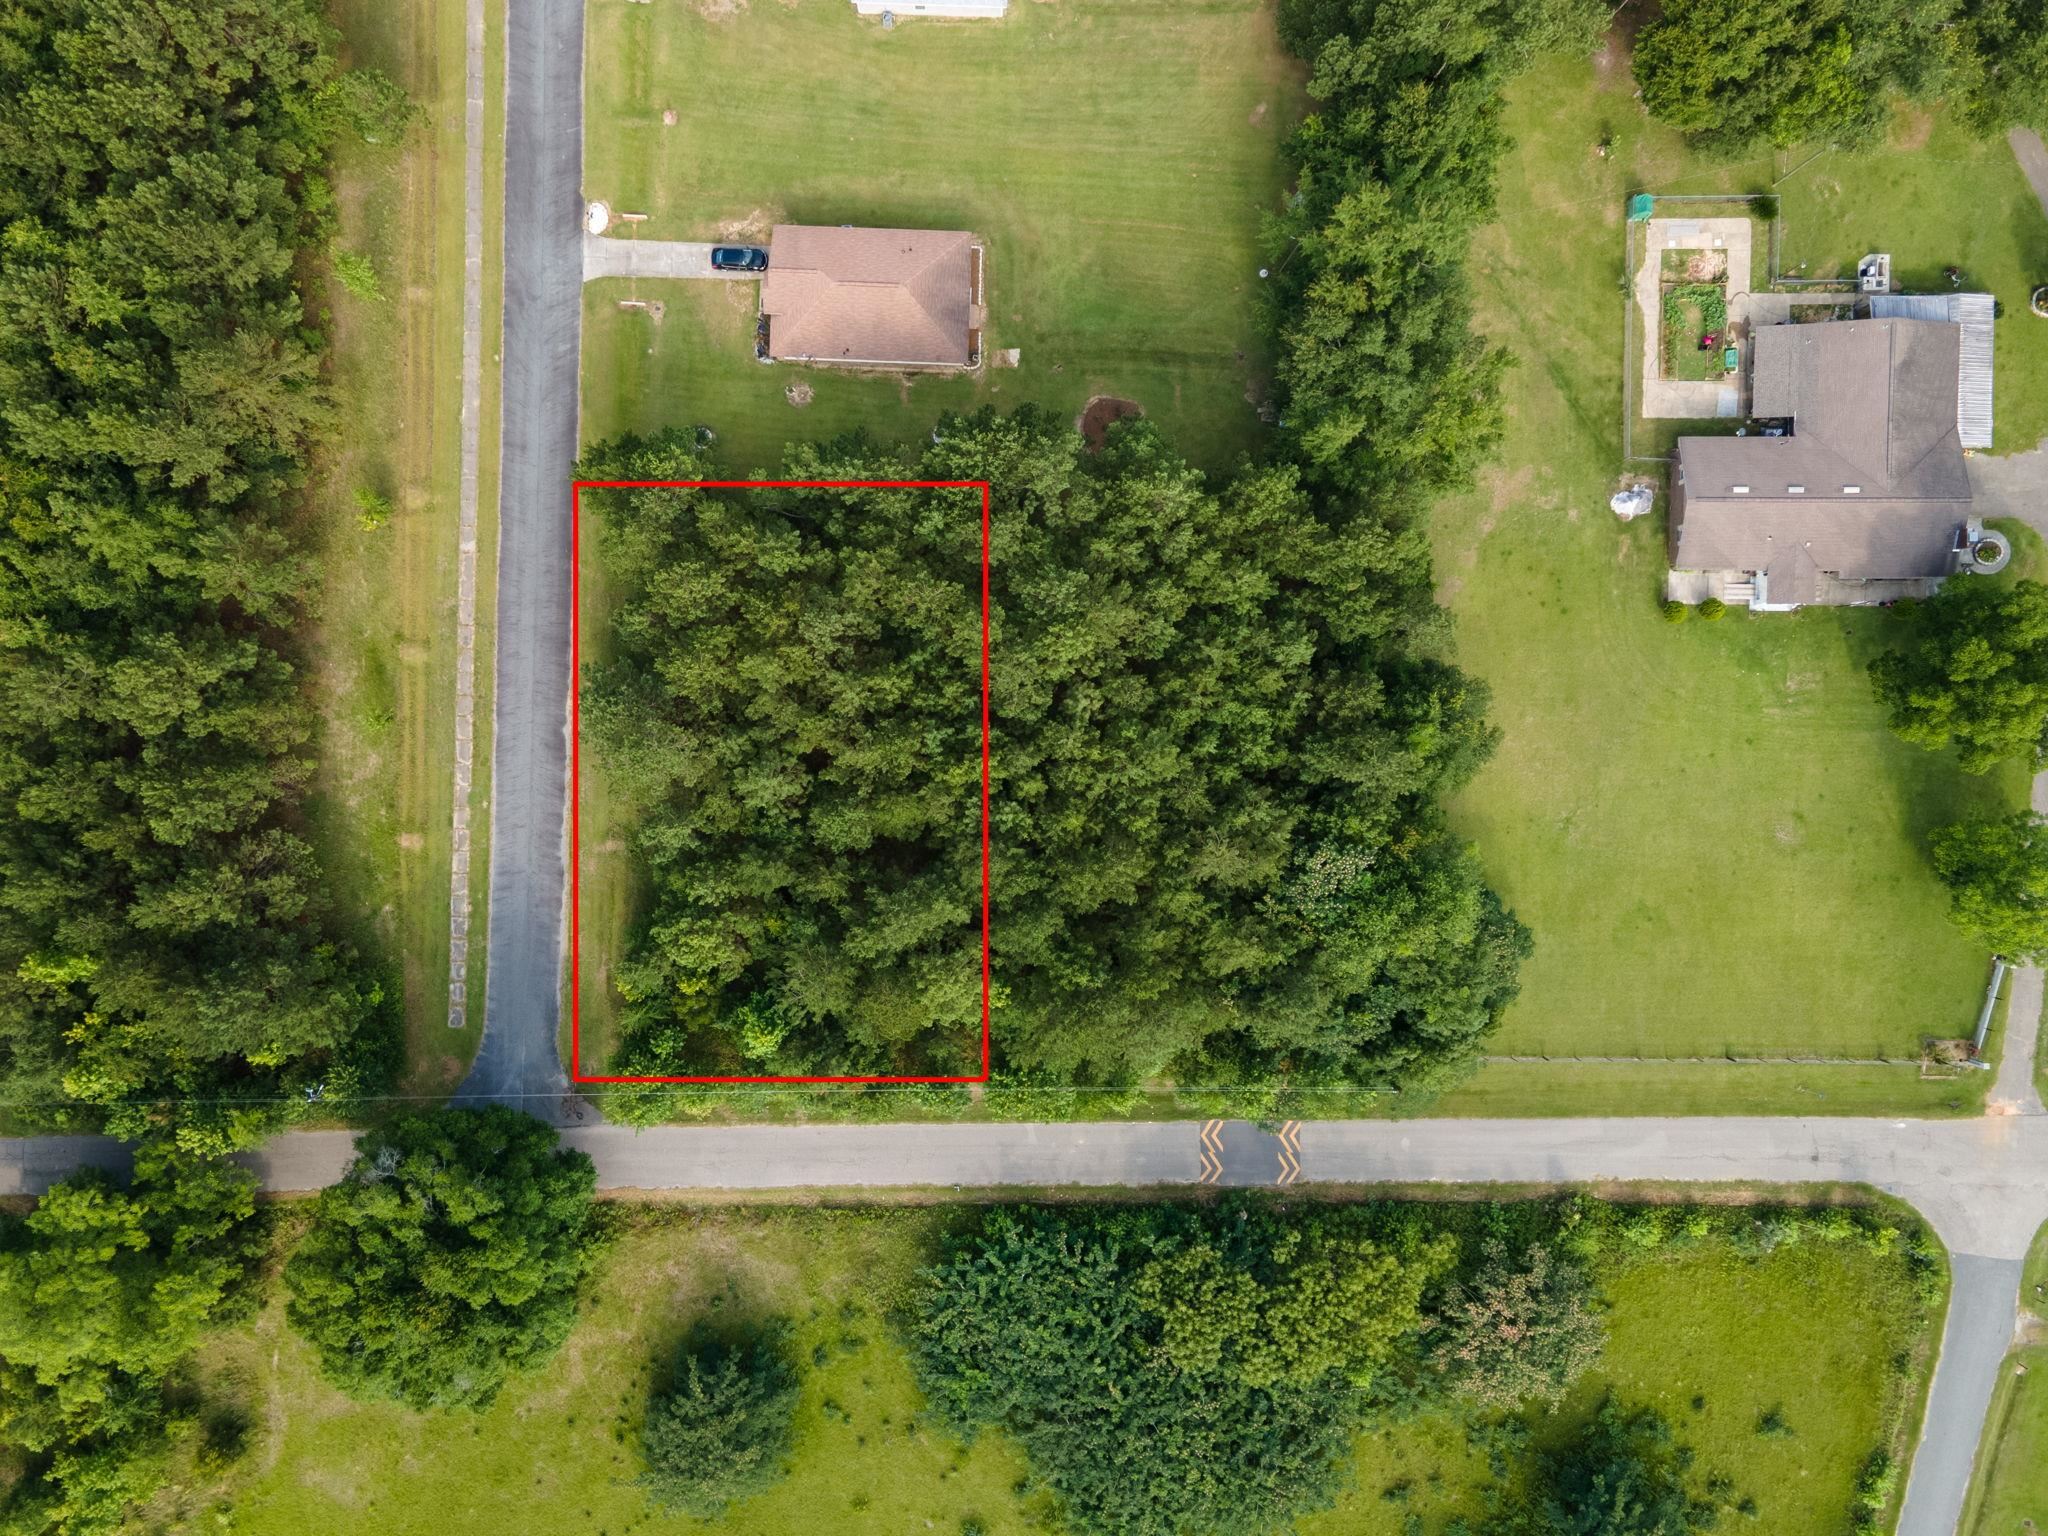 14 Chesterfield,QUINCY,Florida 32351,Lots and land,Chesterfield,359890